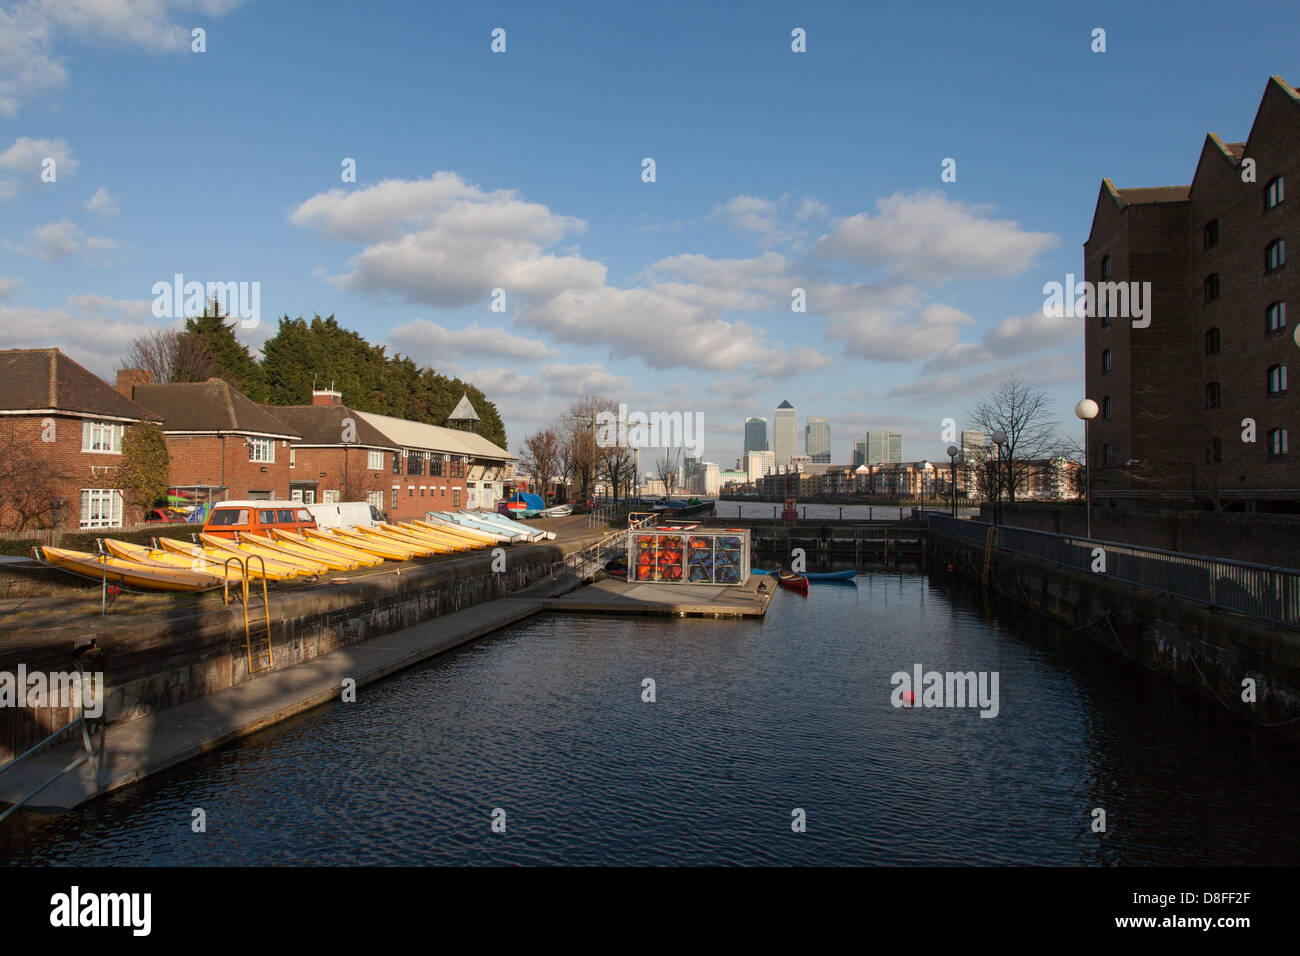 Shadwell Basin Outdoor Activity Centre, Shadwell, east London, Canary Wharf in distance. Stock Photo